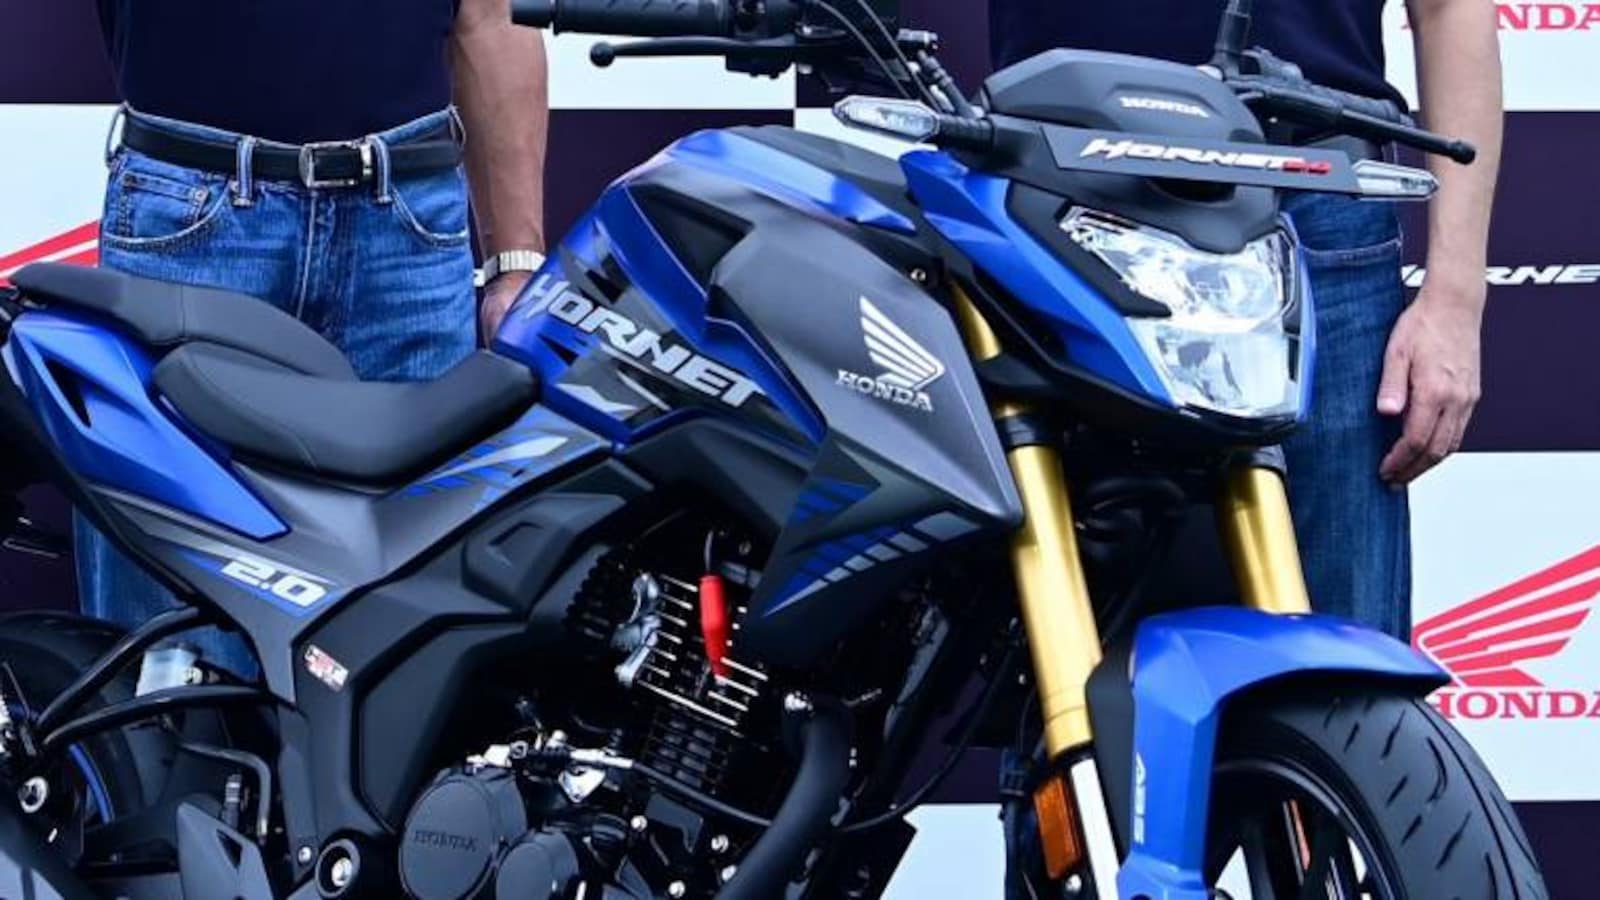 In Pics | Honda launches Hornet  - check pictures, price and availability